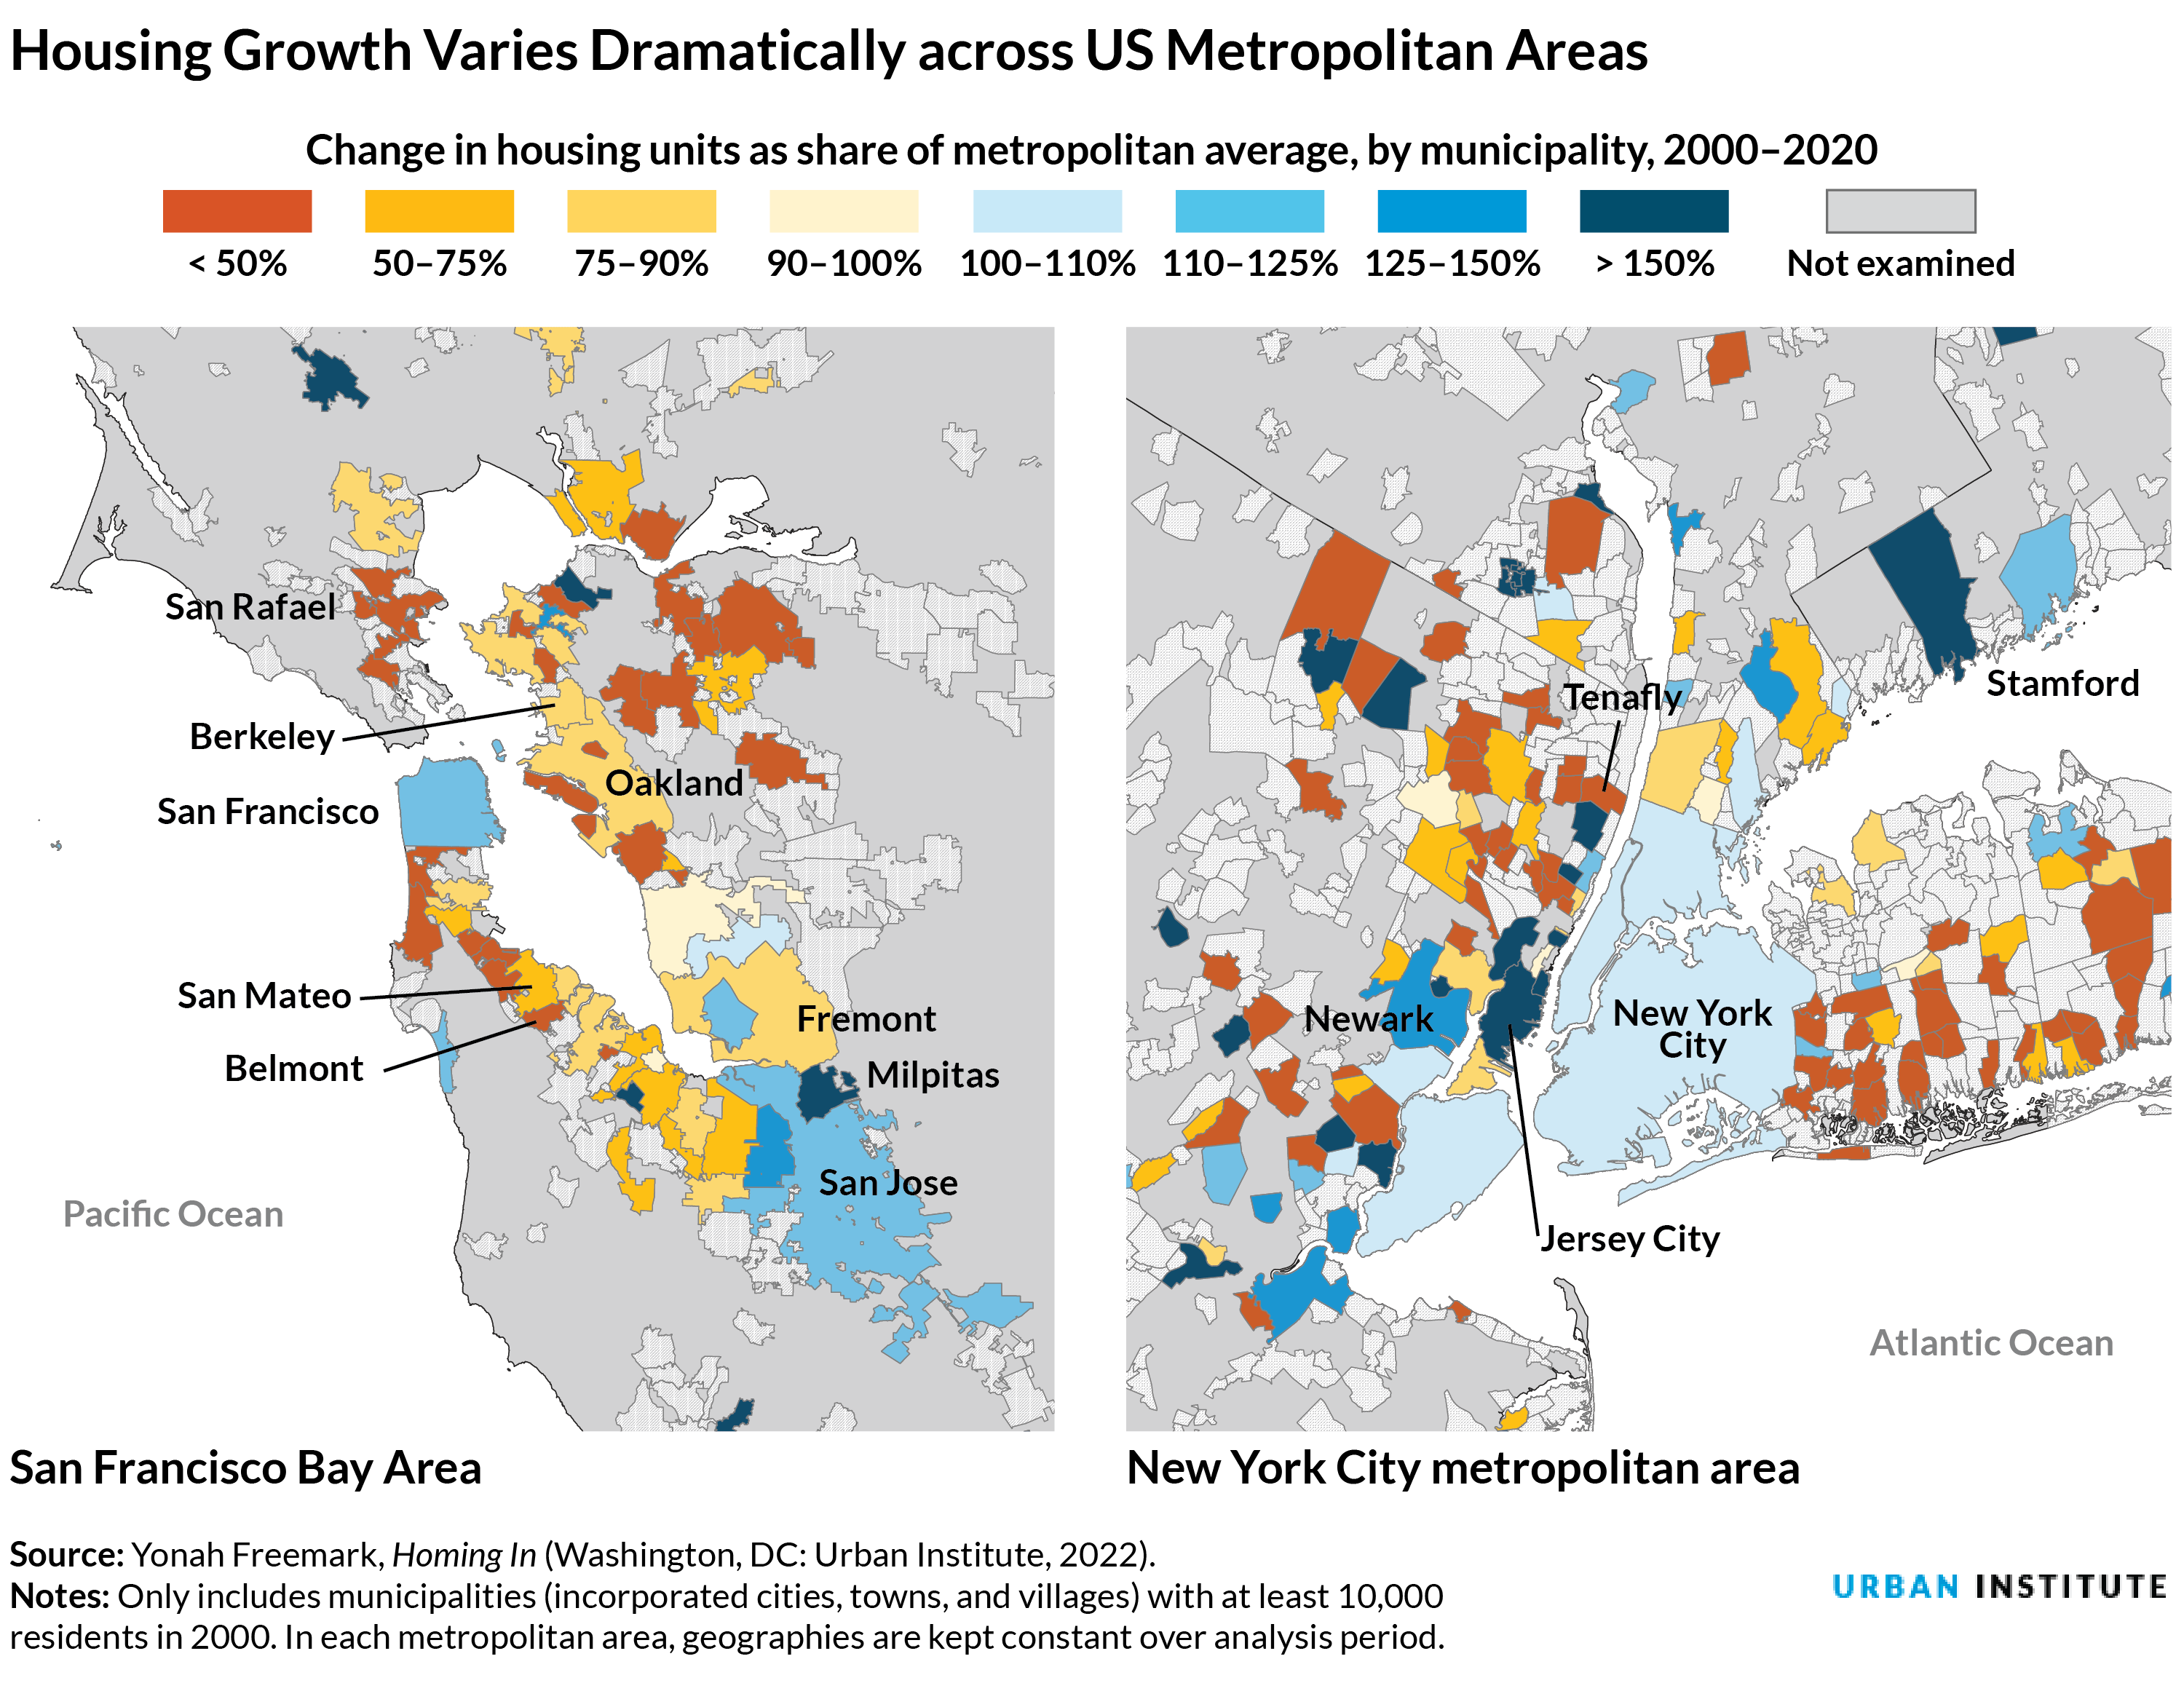 maps of the San Francisco Bay area and New York metropolitan area showing housing growth varies dramatically across US metro areas